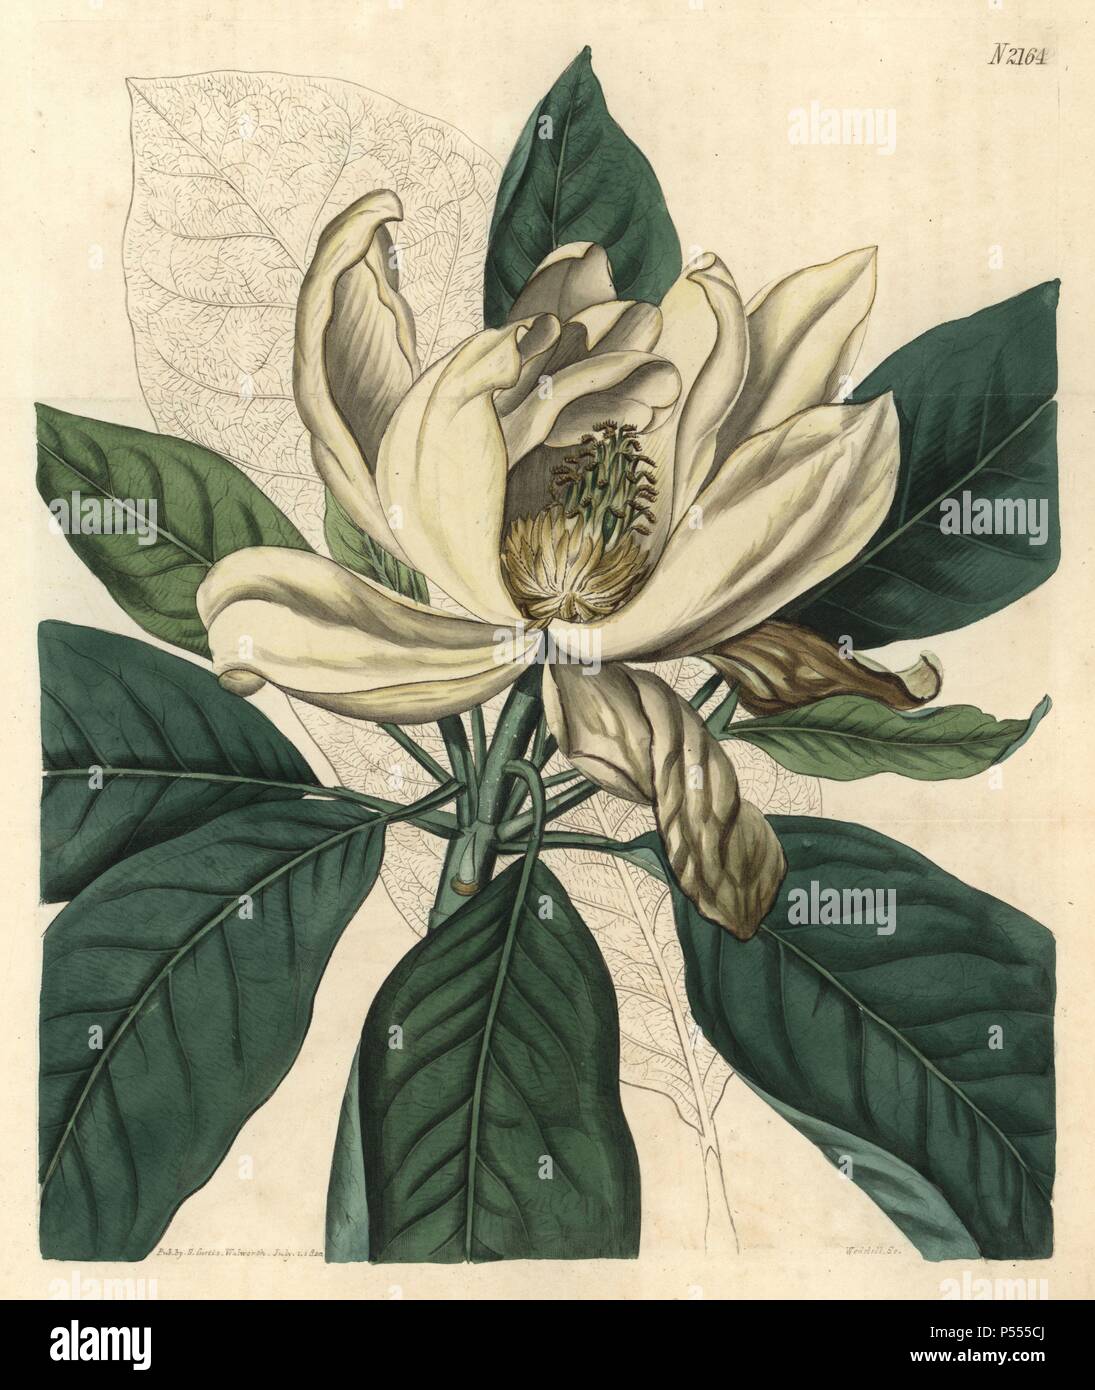 Thomson's new swamp magnolia, Magnolia glauca major. Handcoloured copperplate engraving drawn by John Curtis and engraved by Weddell from 'Curtis's Botanical Magazine'1820, Samuel Curtis, Walworth, London. Stock Photo